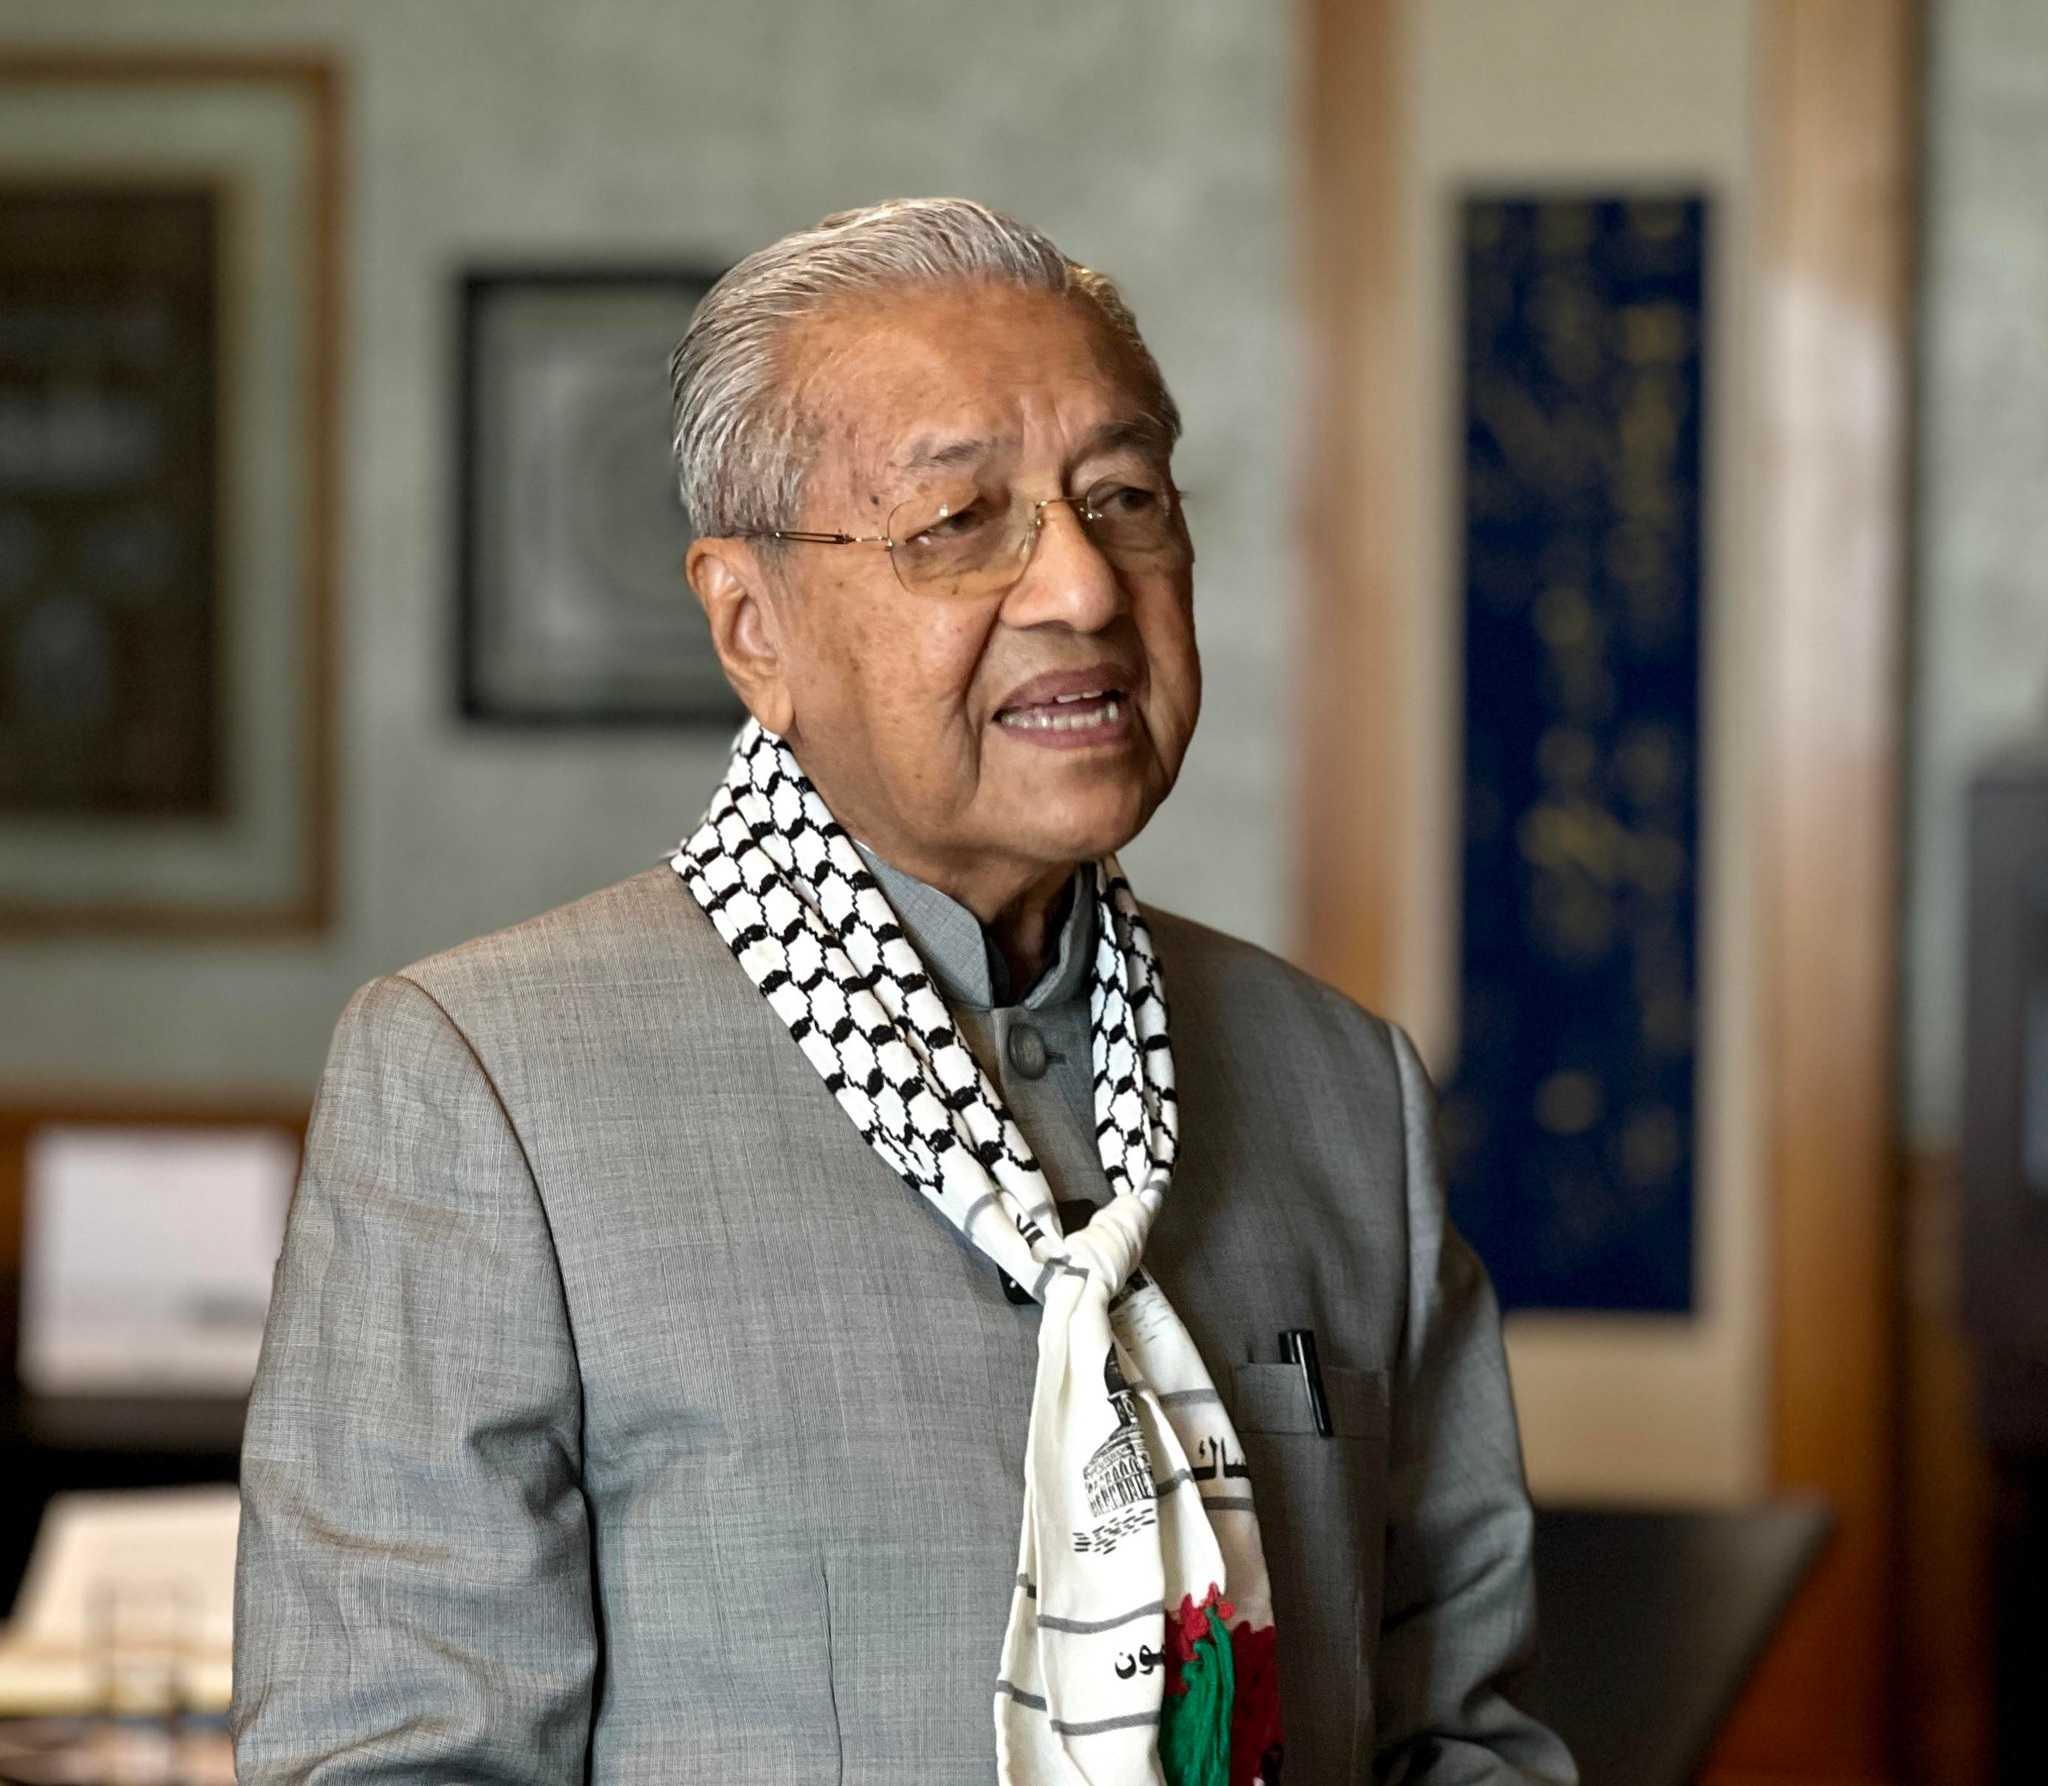 Dr Mahathir Mohamad slams Muslim leaders who 'play safe' by issuing meaningless diplomatic appeals' instead of using their oil wealth as leverage to demand Western powers to stop Israel's genocide of Palestinians. 